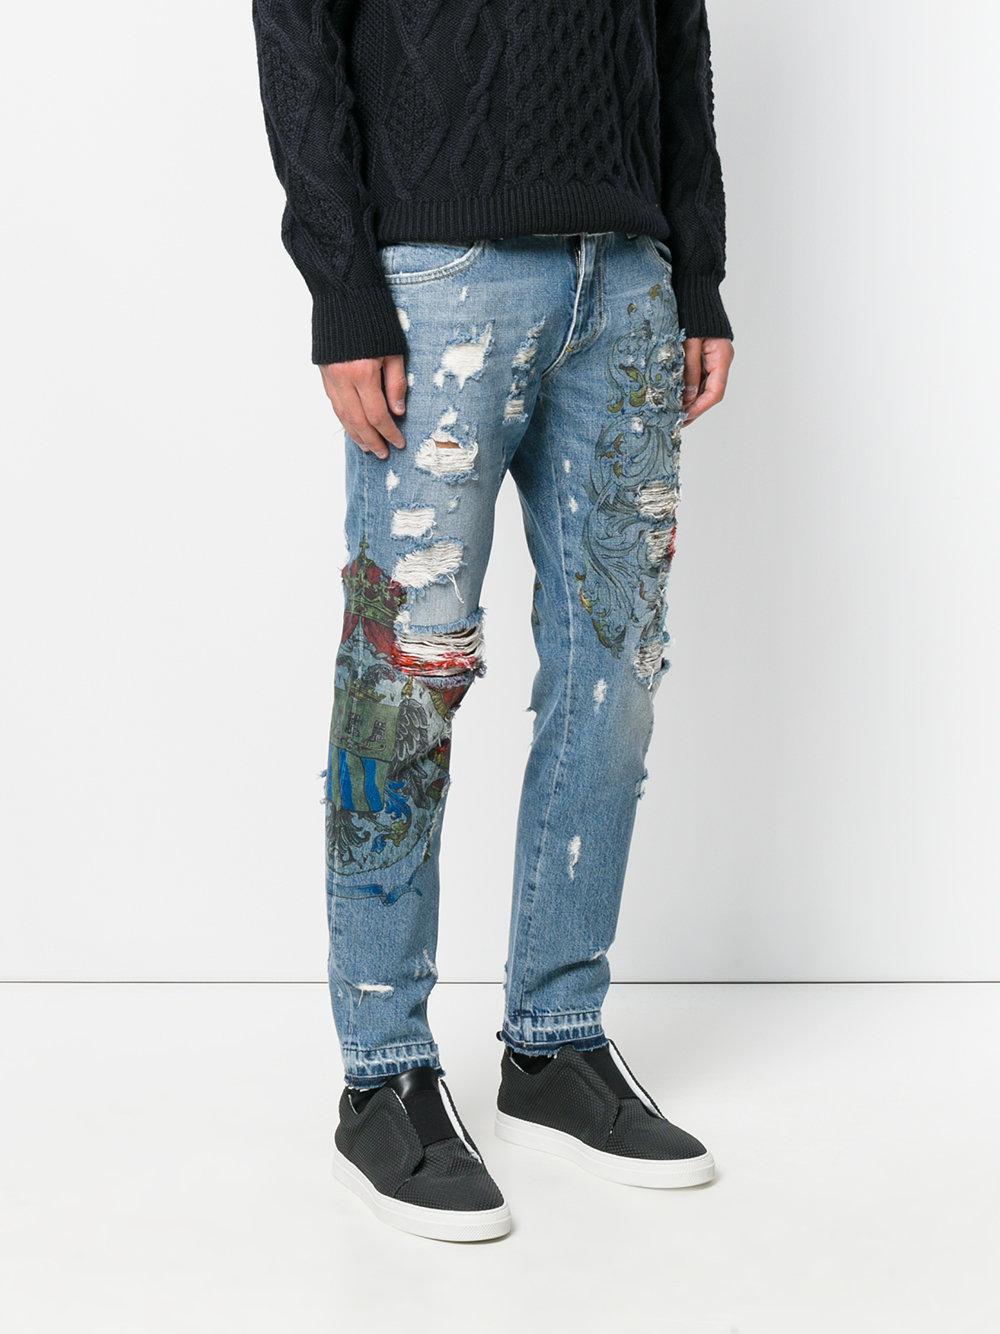 Lyst - Dolce & Gabbana Distressed Skinny Jeans in Blue for Men